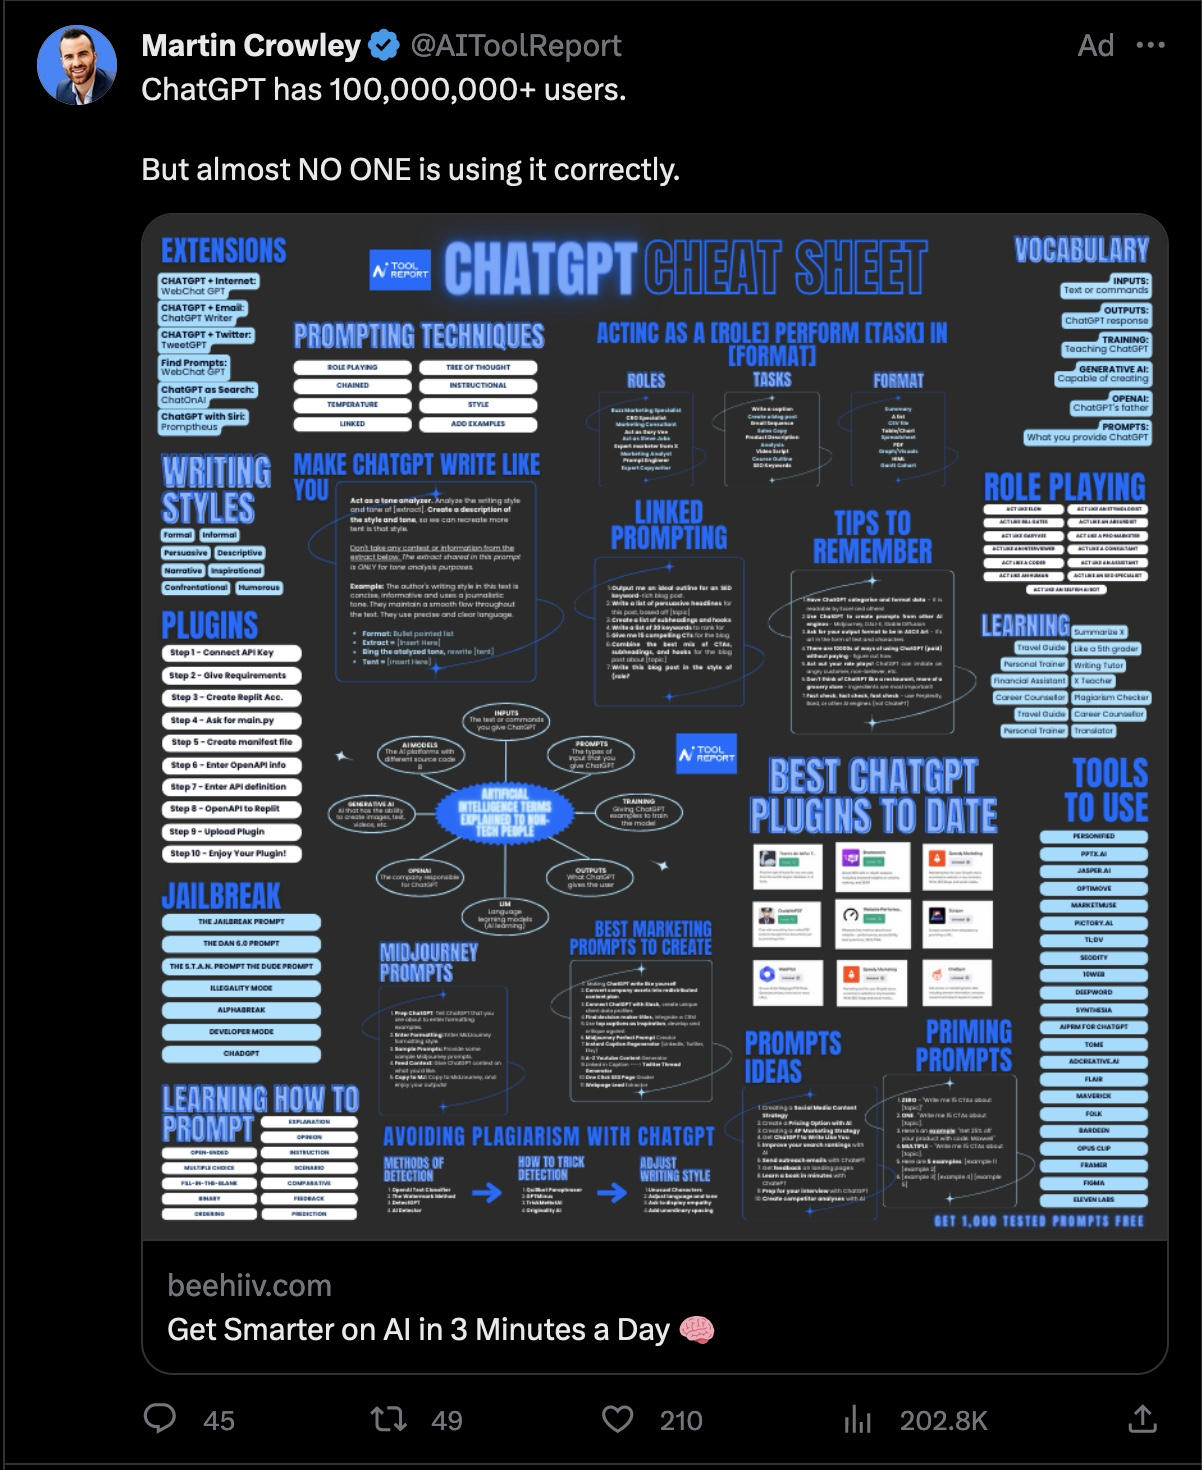 A screenshot of a Twitter ad, "ChatGPT has 100,000,000+ users. But almost NO ONE is using it correctly." The attached image says "ChatGPT Cheat Sheet" at the top and is covered with text that is too small to be legible.